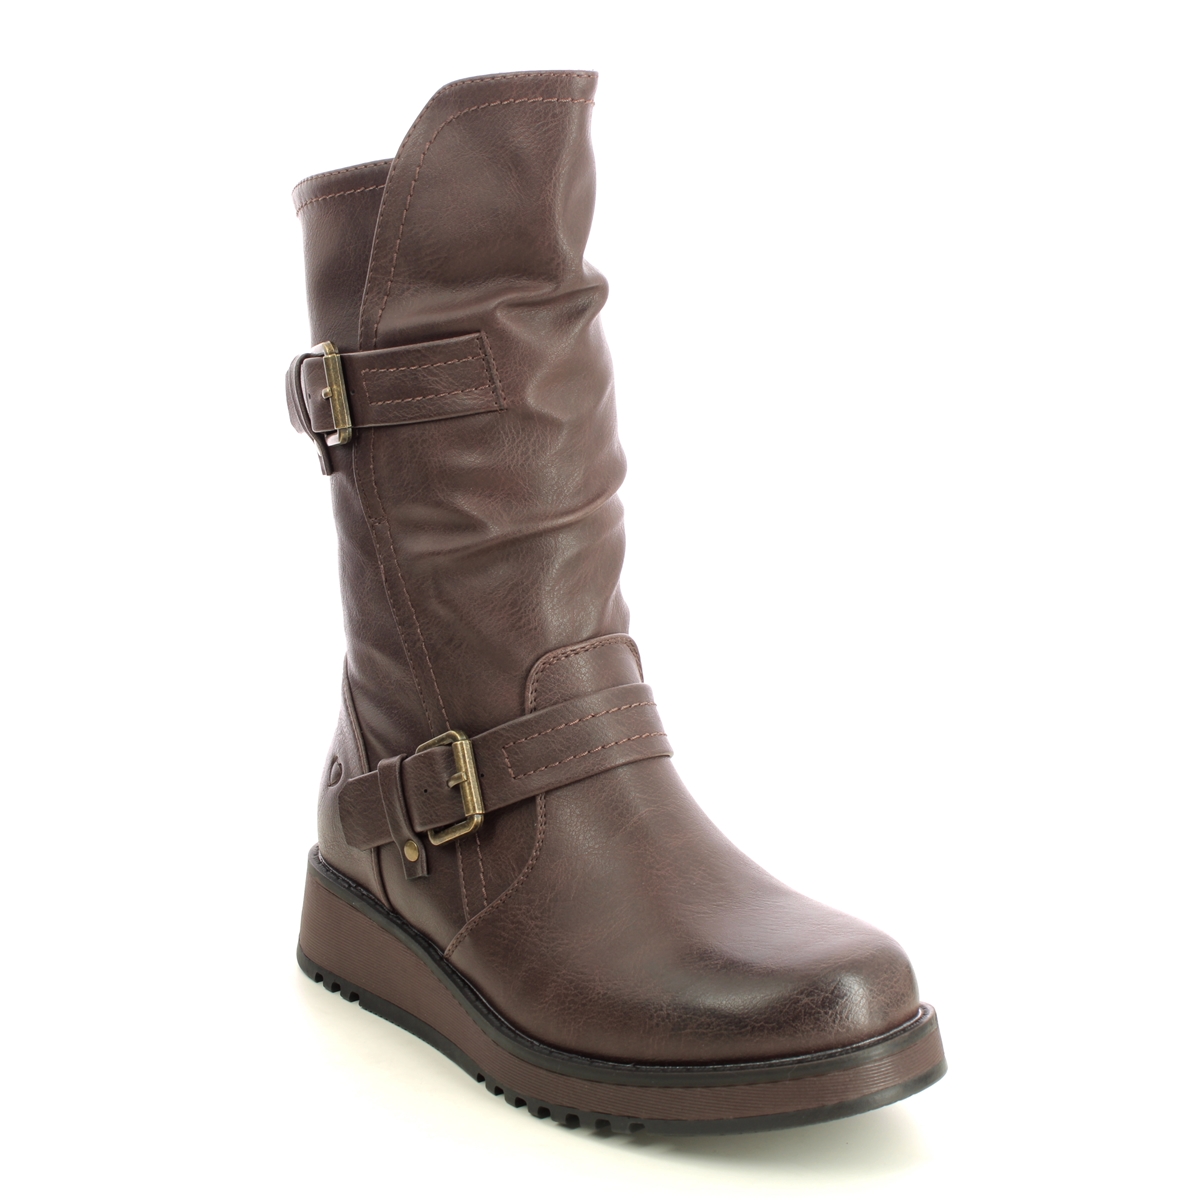 Heavenly Feet Hannah 4 Chocolate Brown Womens Mid Calf Boots 3507-27 In Size 4 In Plain Chocolate Brown